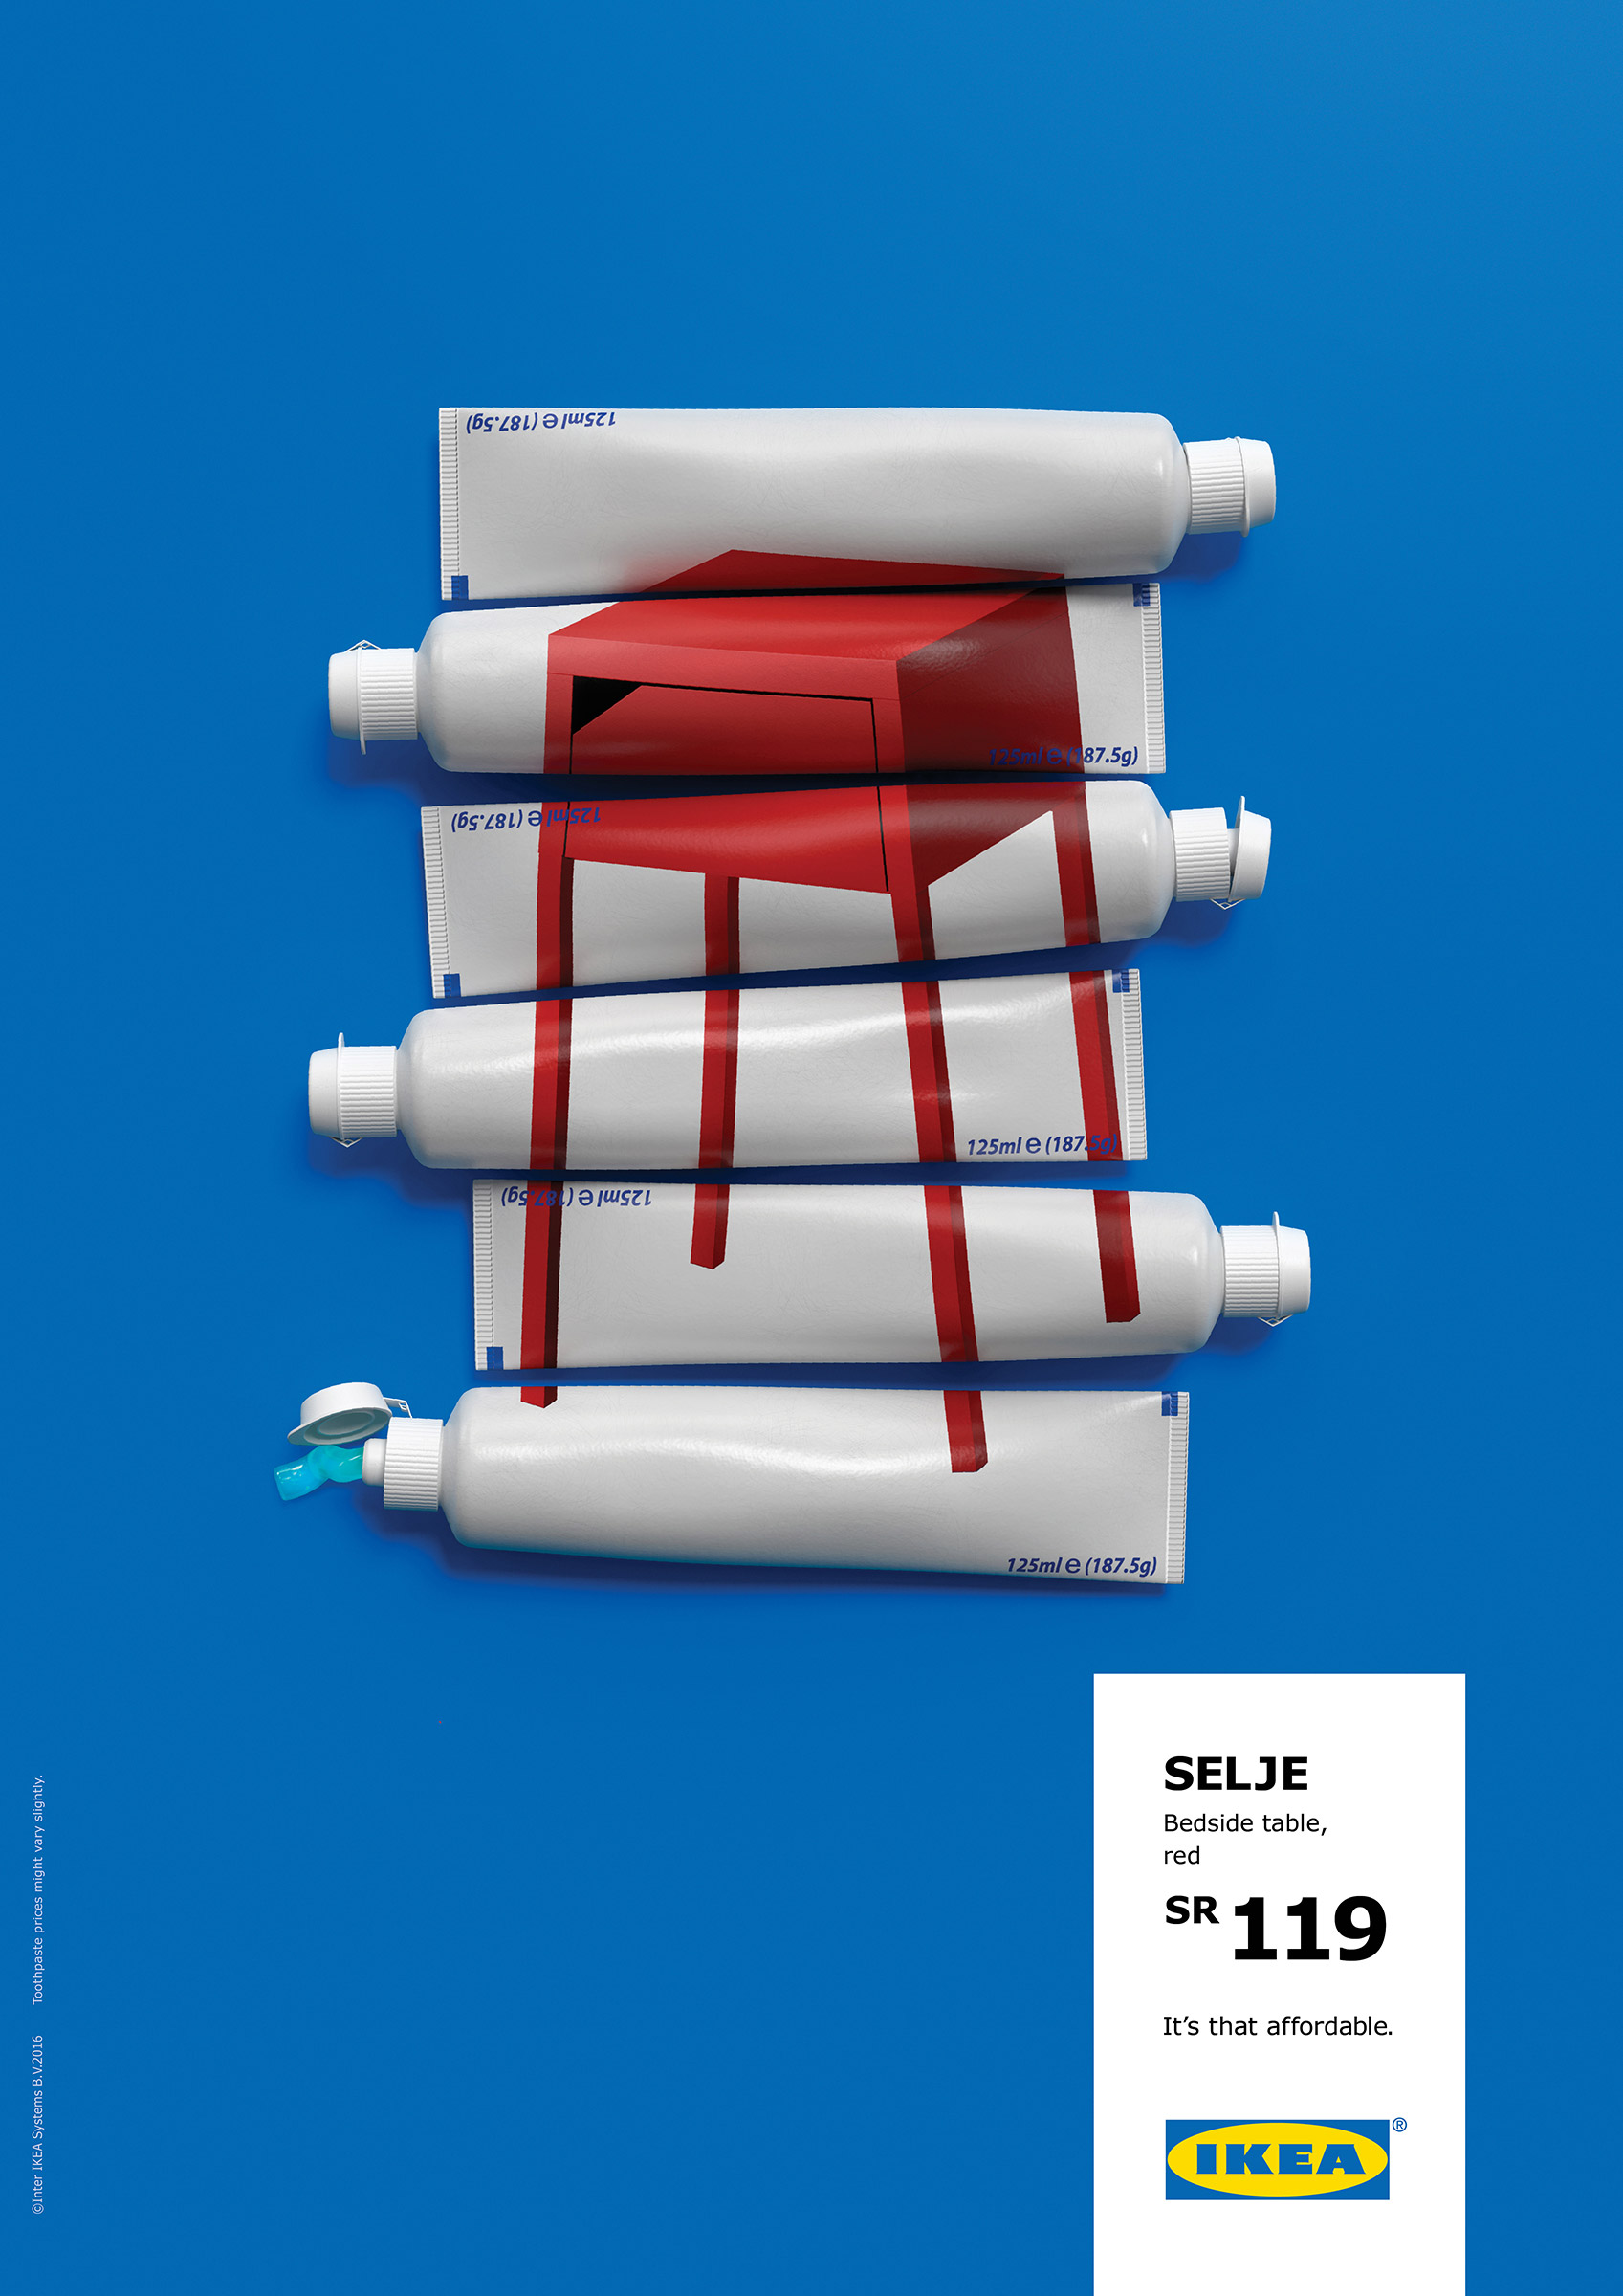 IKEA. It's that affordable.